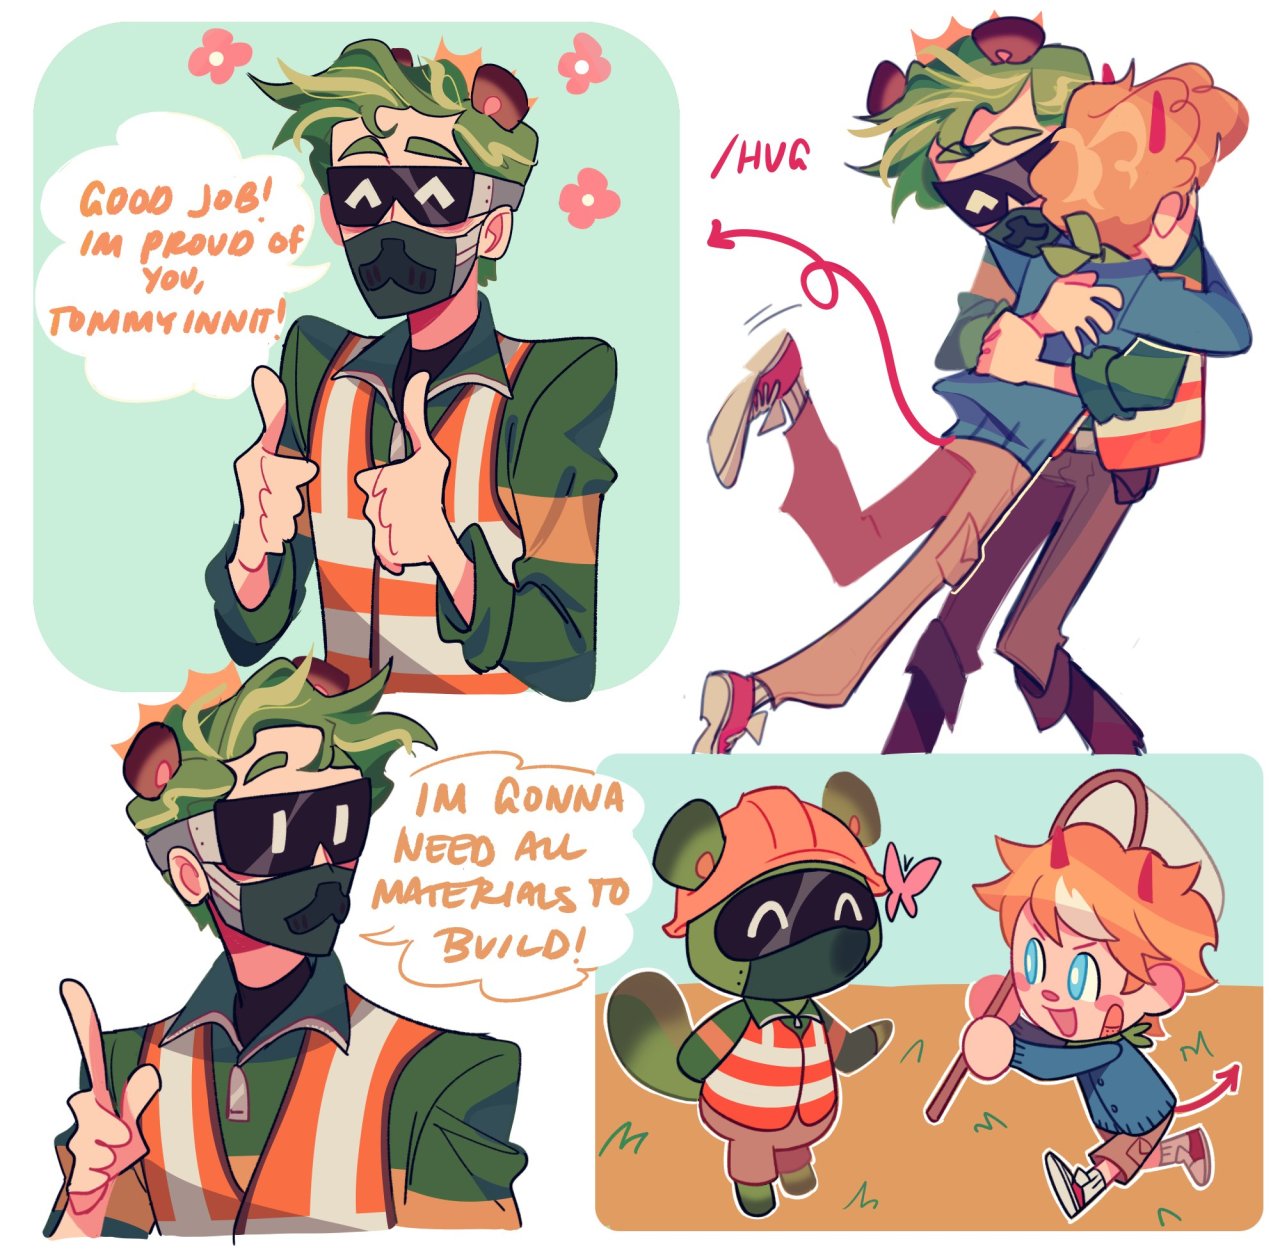 A comic of Sam Nook and Tommy. The top right panel shows Sam Nook as a human wearing construction glasses and a mask with a bear smile on it. He also wears an orange construction vest over his dark green shirt. He's giving Tommy two thumbs up and says 'Good job! I'm proud of you, Tommyinnit!' while emoting the smiling flowers animal crossing emotion. The next panel is Tommy hugging Sam Nook and slash hug next to them. The next panel shows Sam Nook sending Tommy off with 'Im gonna need matierials to build.' The final panel shows Sam Nook and Tommy drawn as Animal Crossing characters. Sam Nook is drawn to look like Tom Nook while Tommy is drawn to look like a New Horizons character running with a net in his hand.